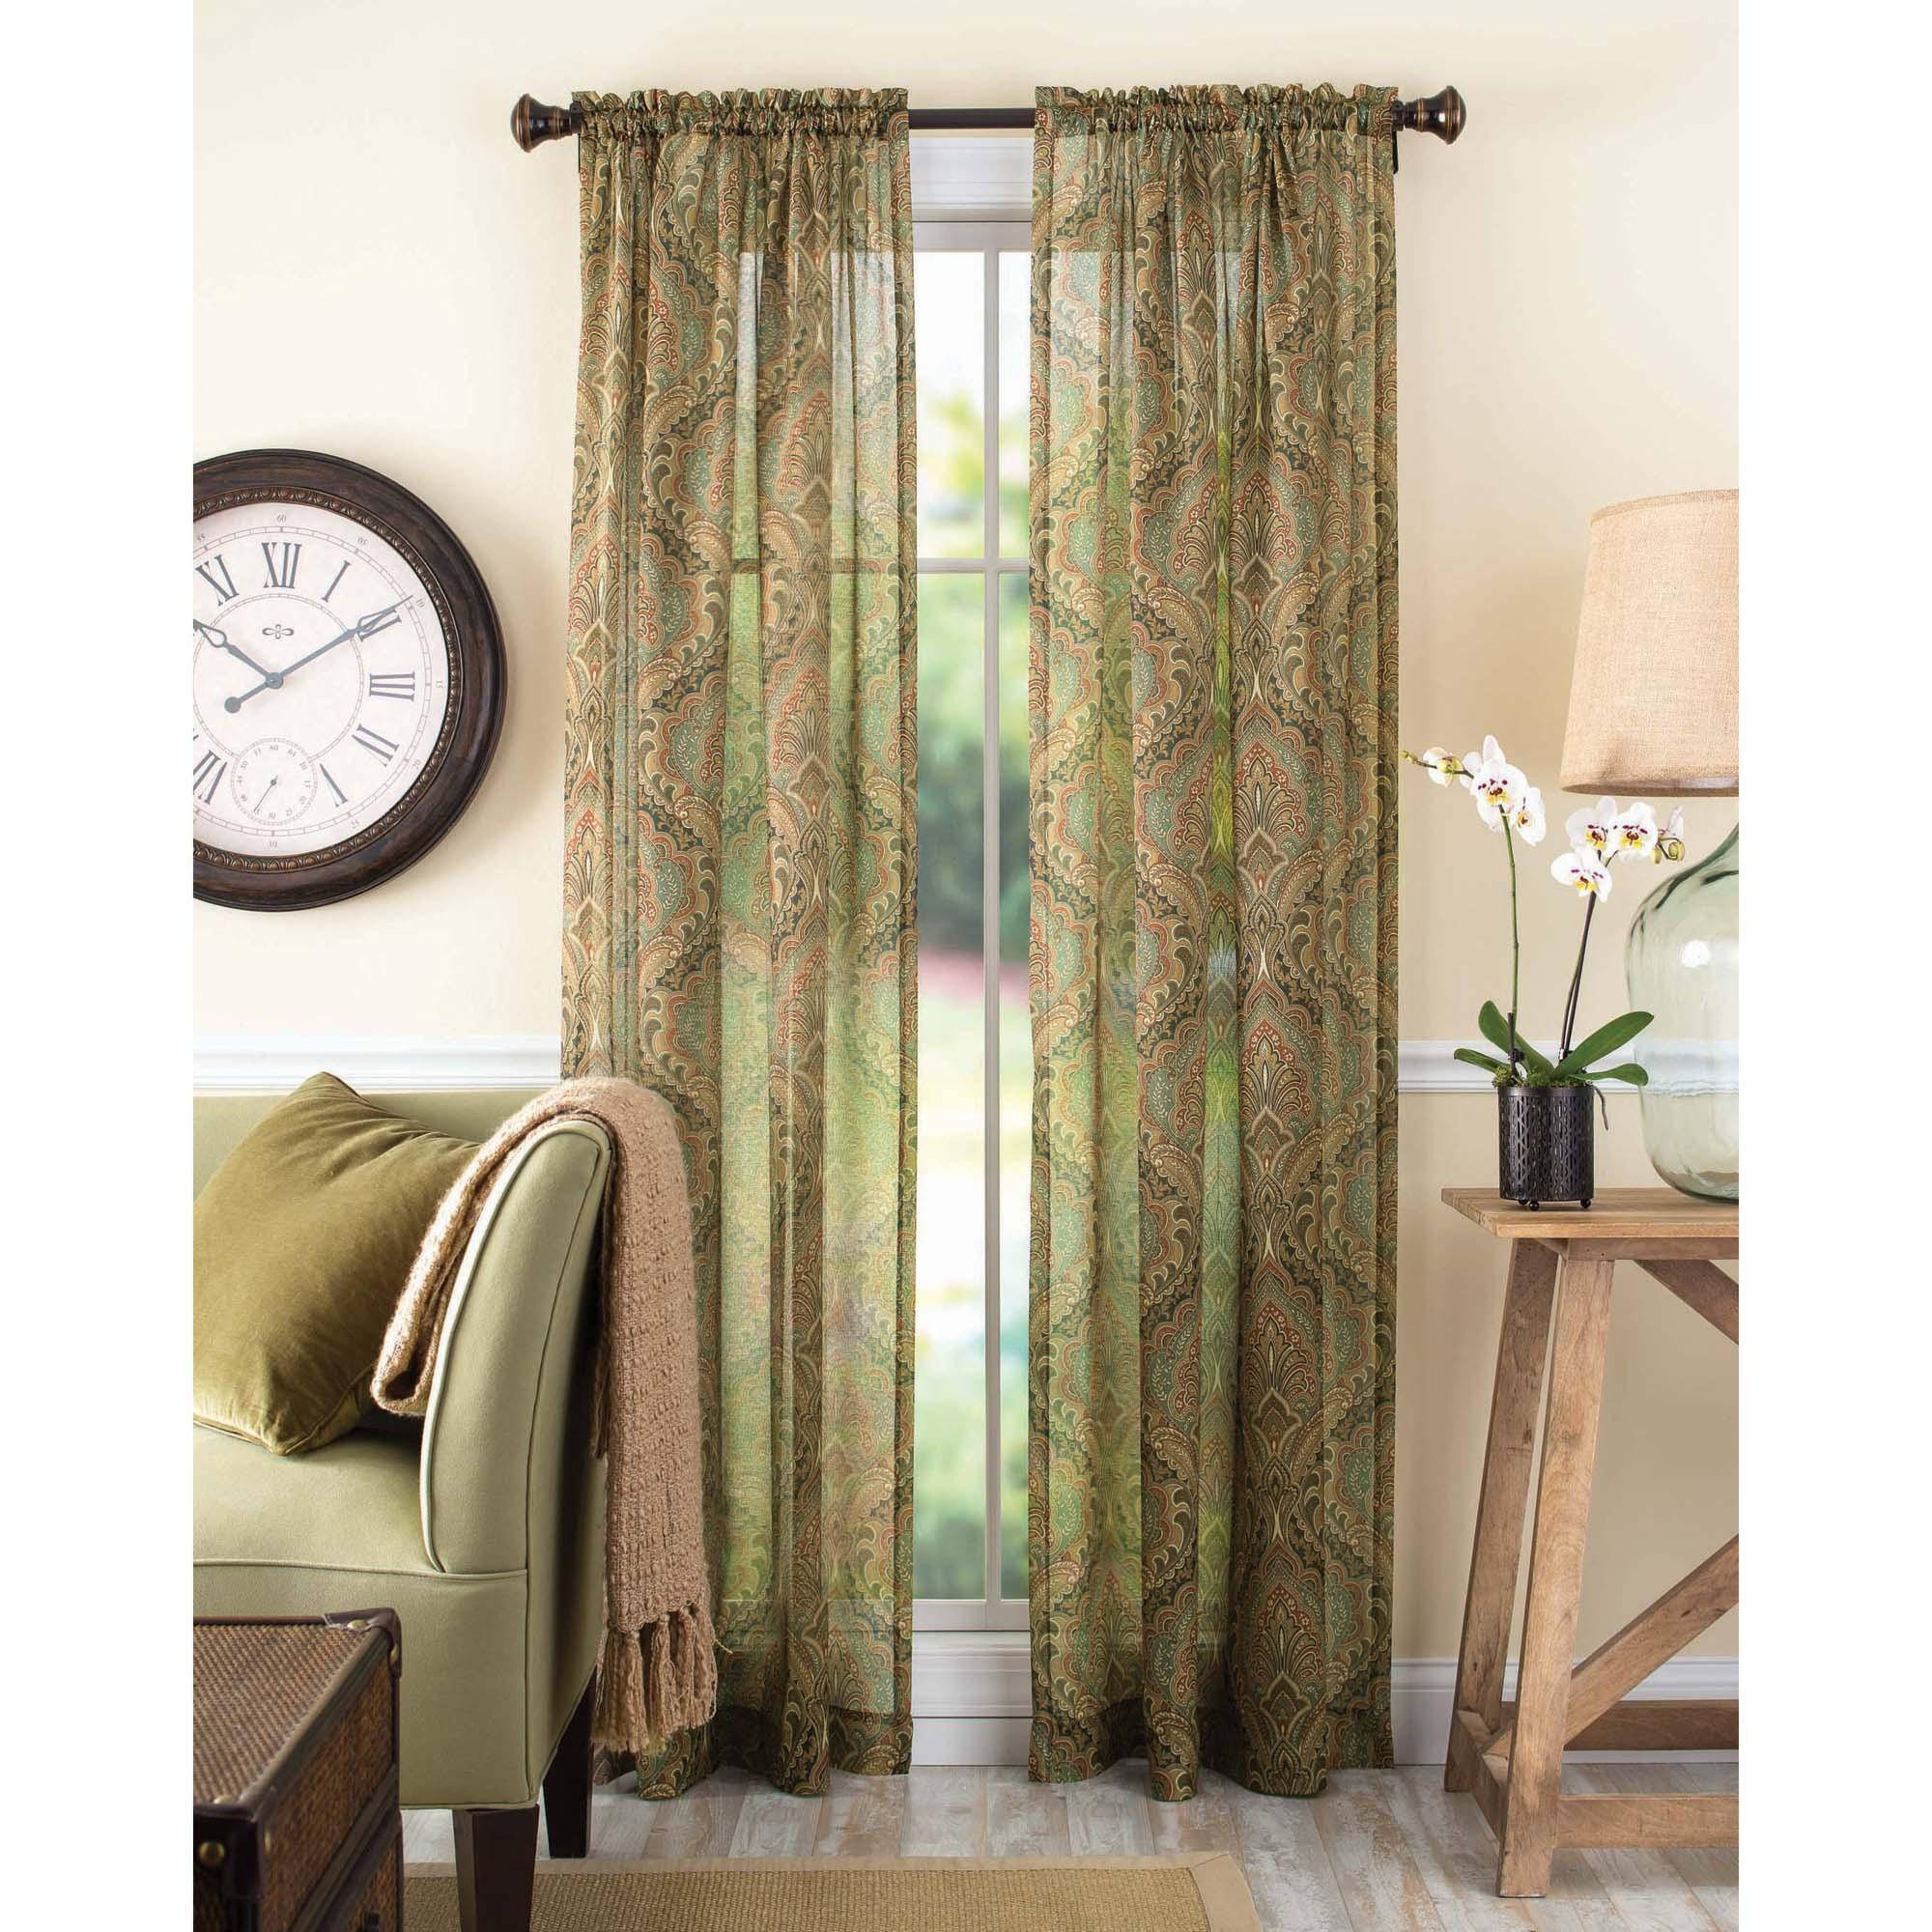 Walmart Curtains For Living Room
 Accessories Stunning Curtains Walmart For Your Lovely